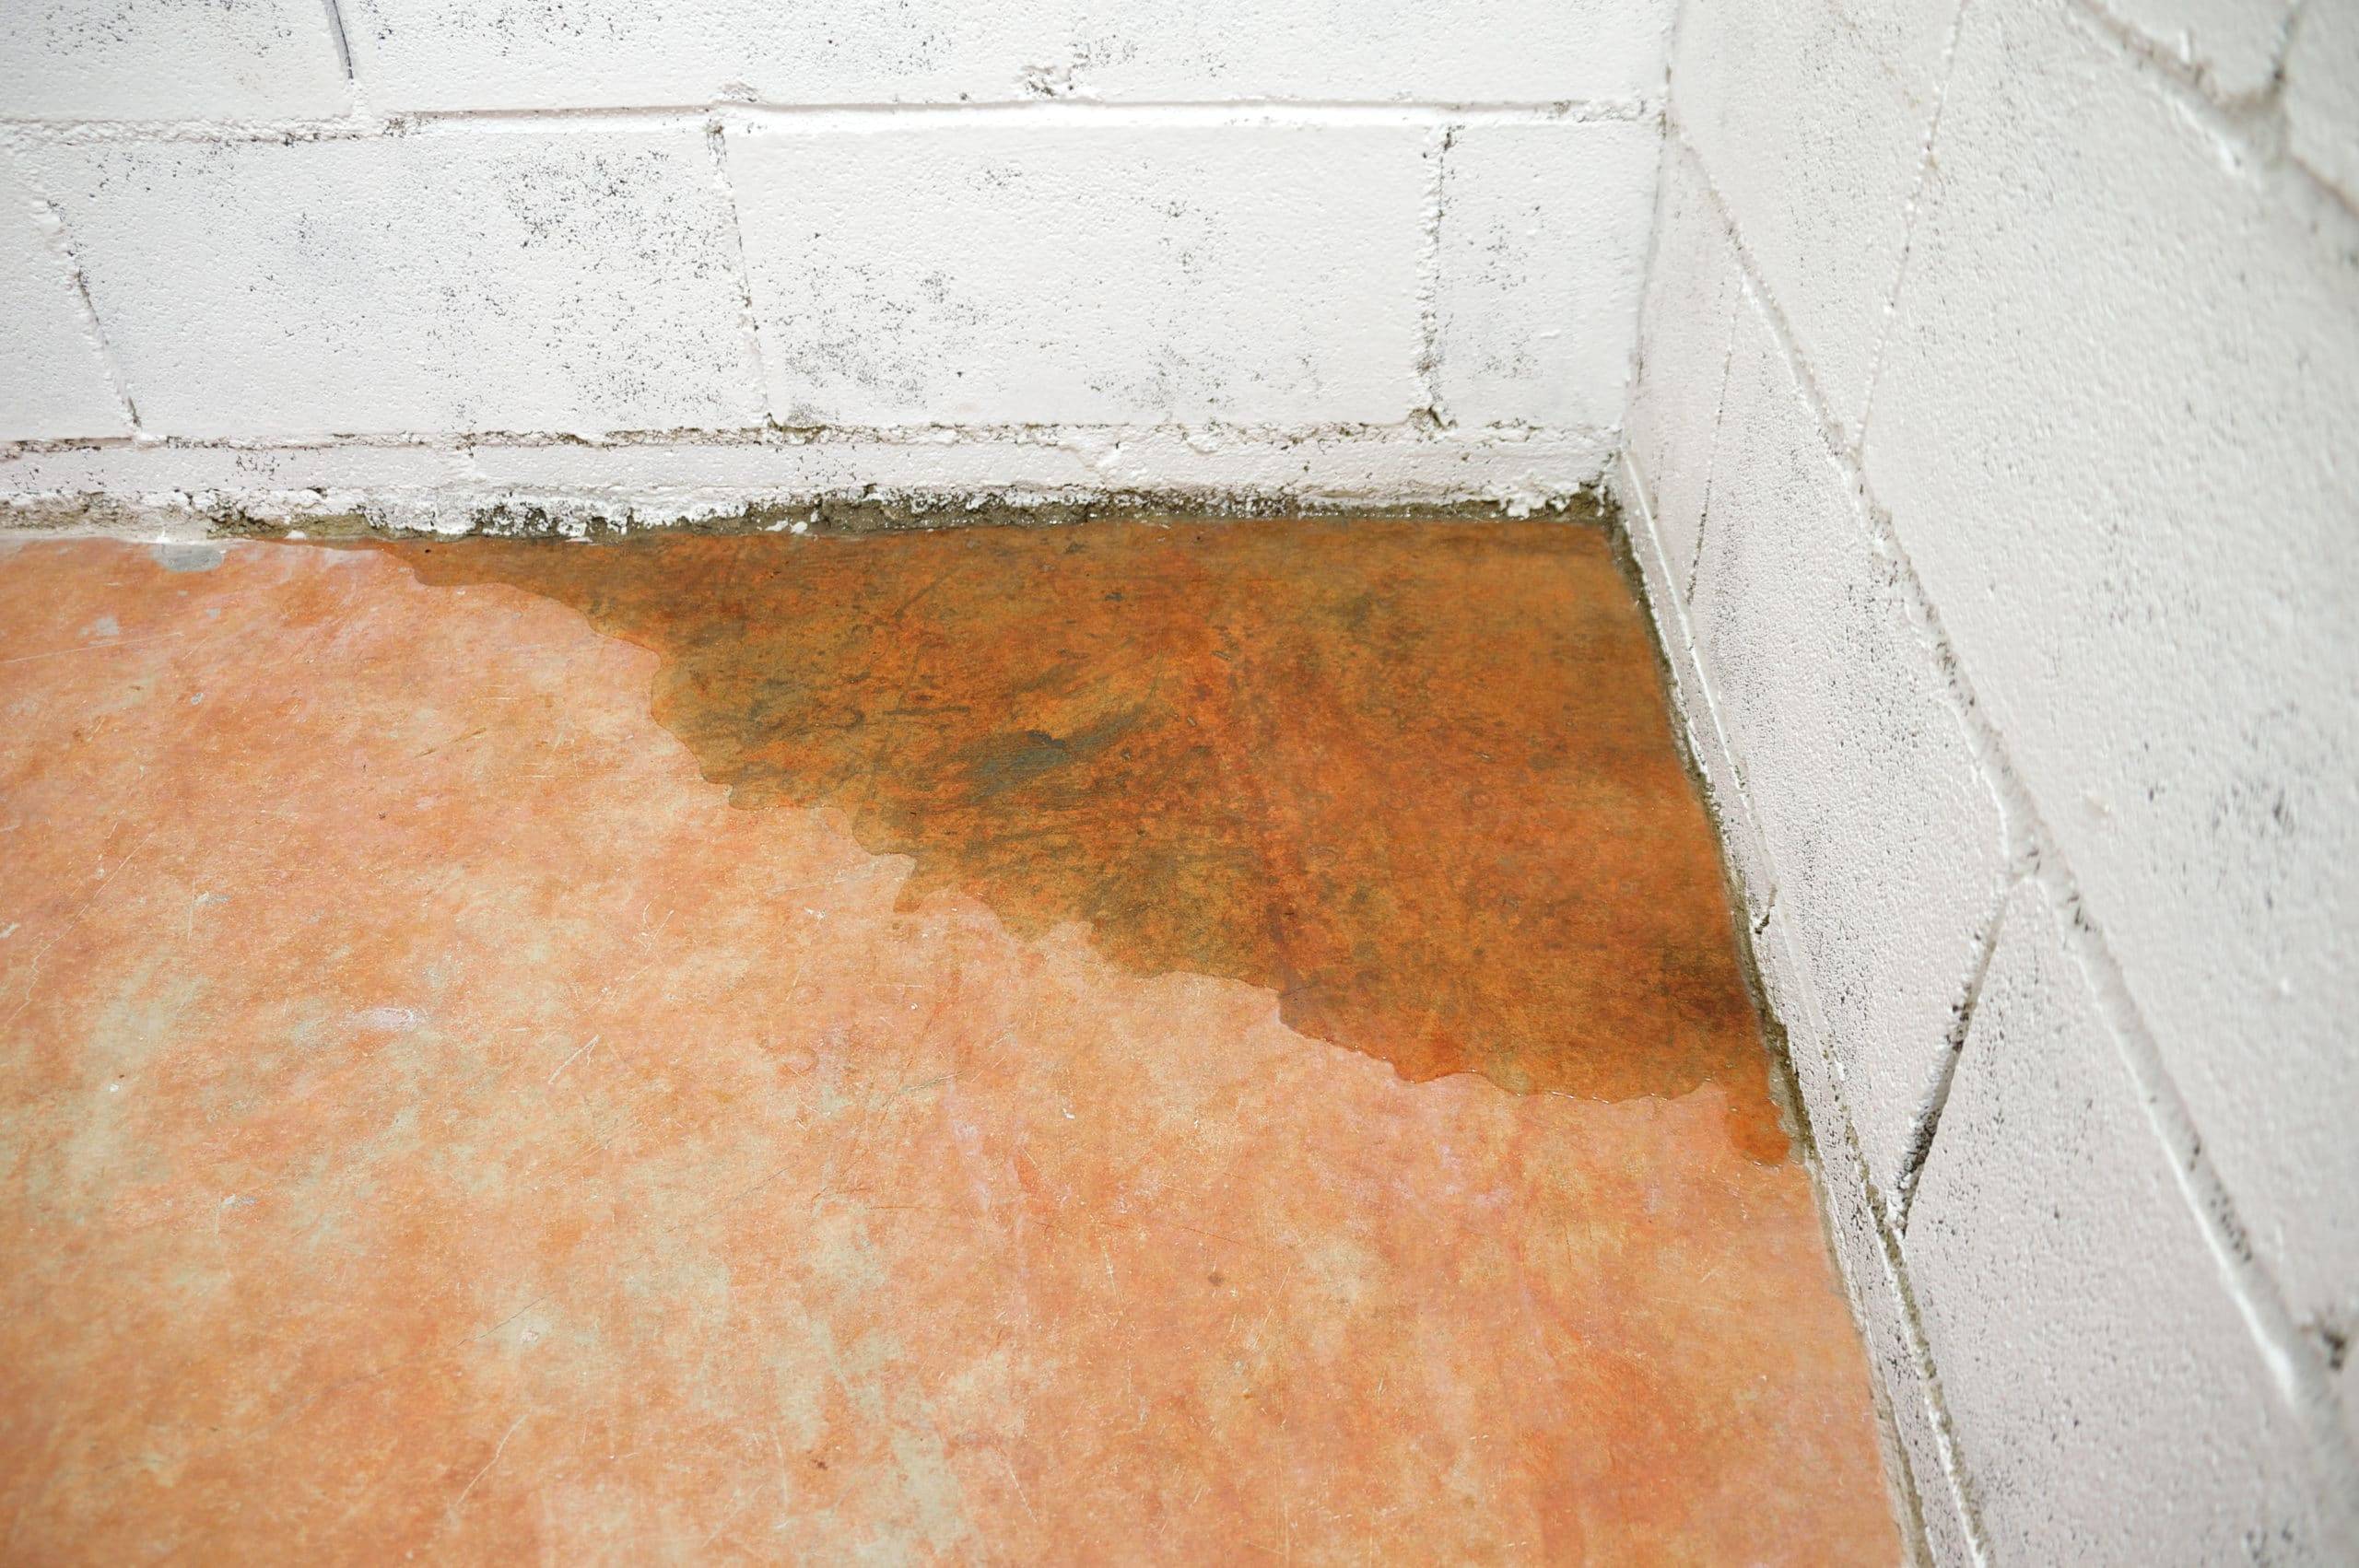 How do I stop water from seeping into basement walls?